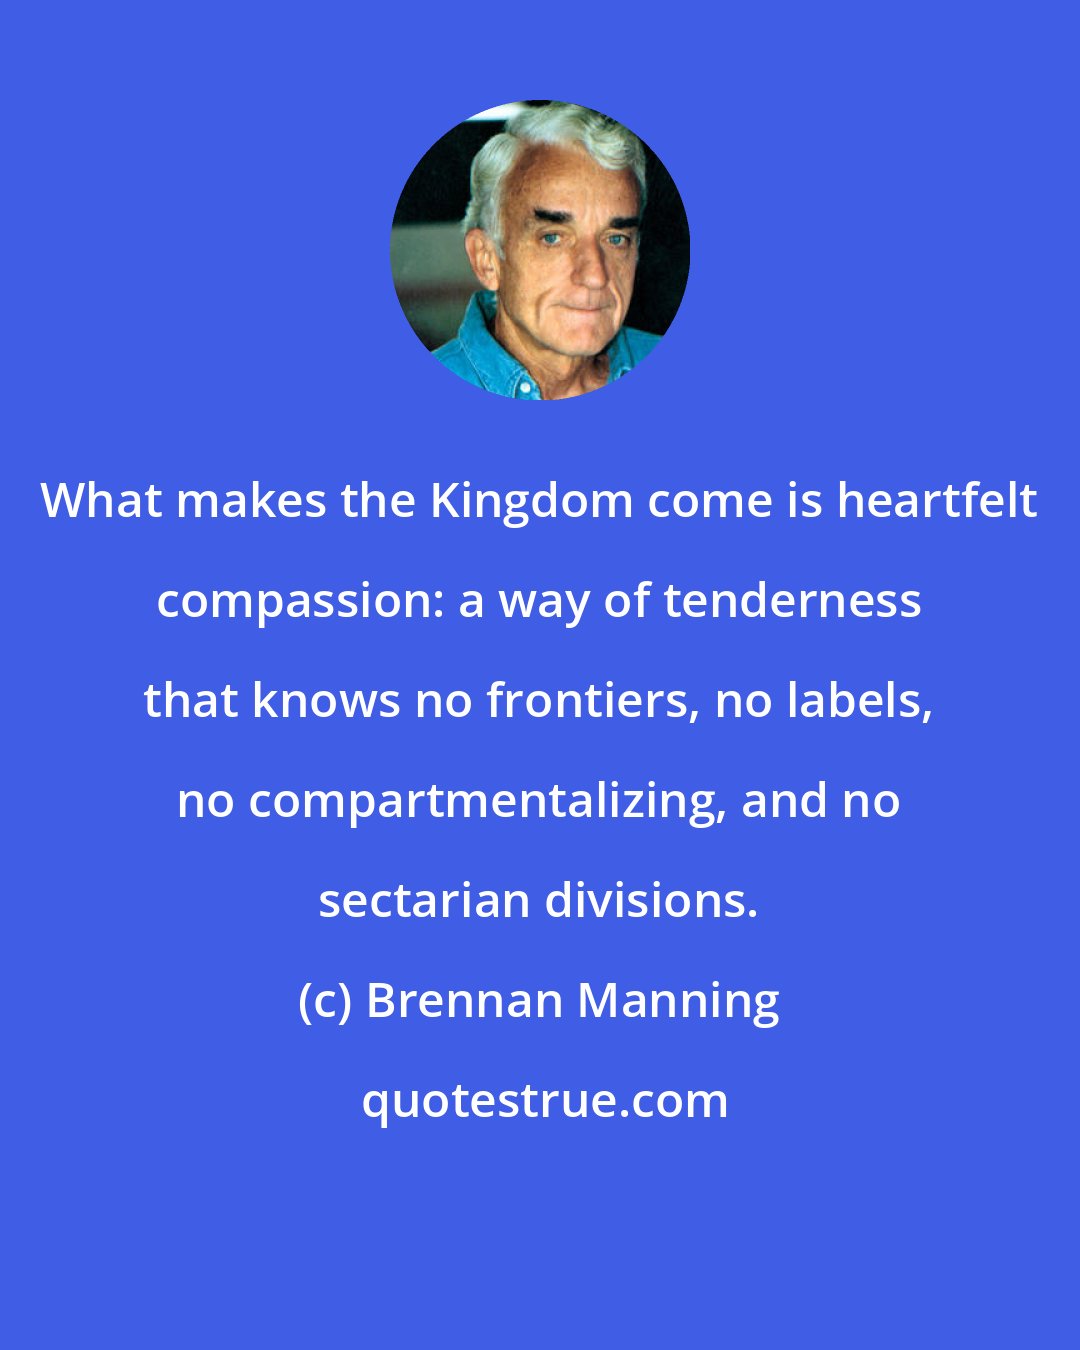 Brennan Manning: What makes the Kingdom come is heartfelt compassion: a way of tenderness that knows no frontiers, no labels, no compartmentalizing, and no sectarian divisions.